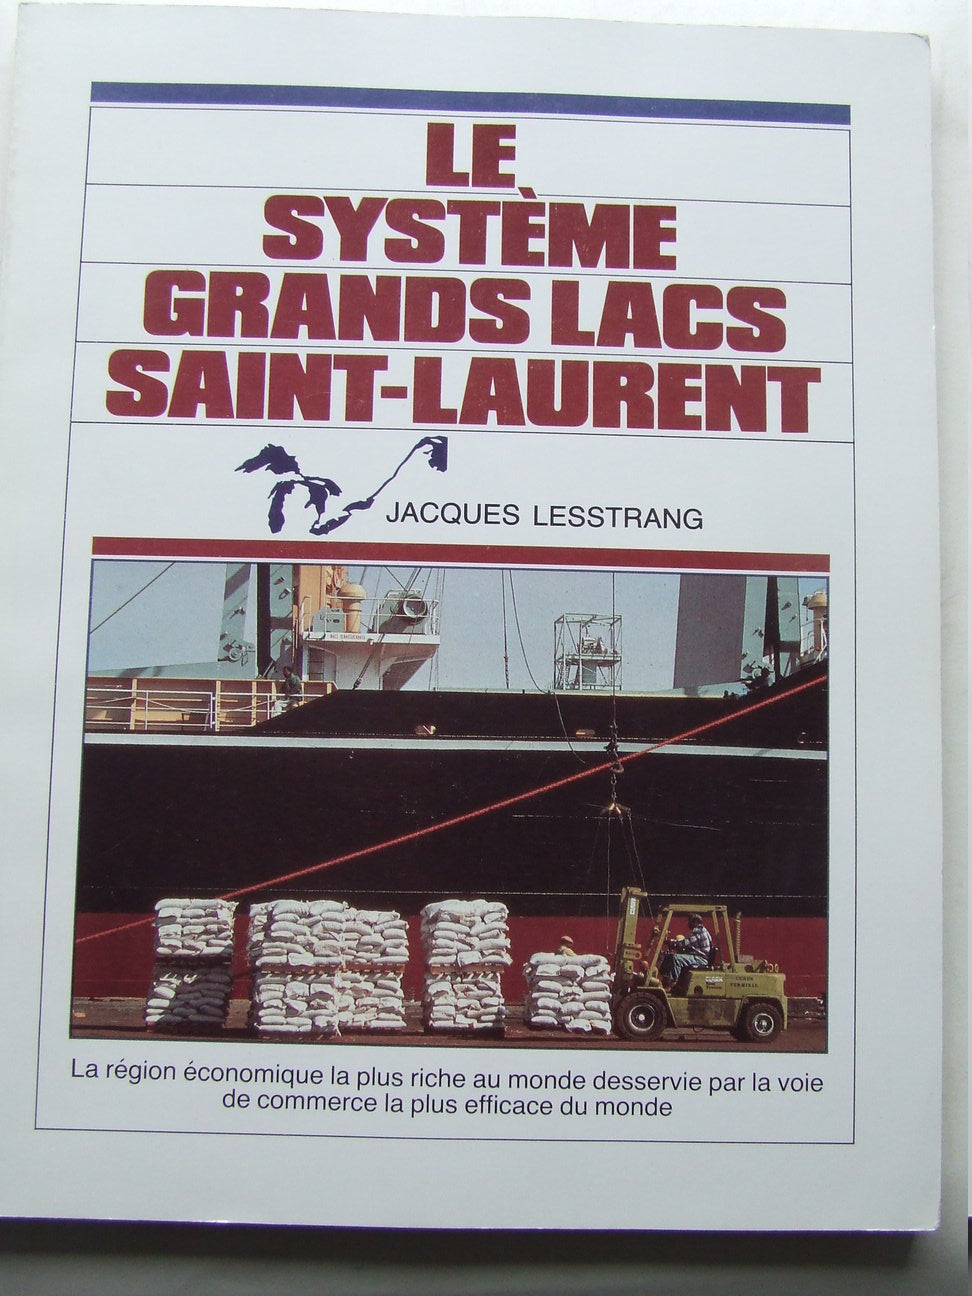 The Great Lakes / St.Lawrence System